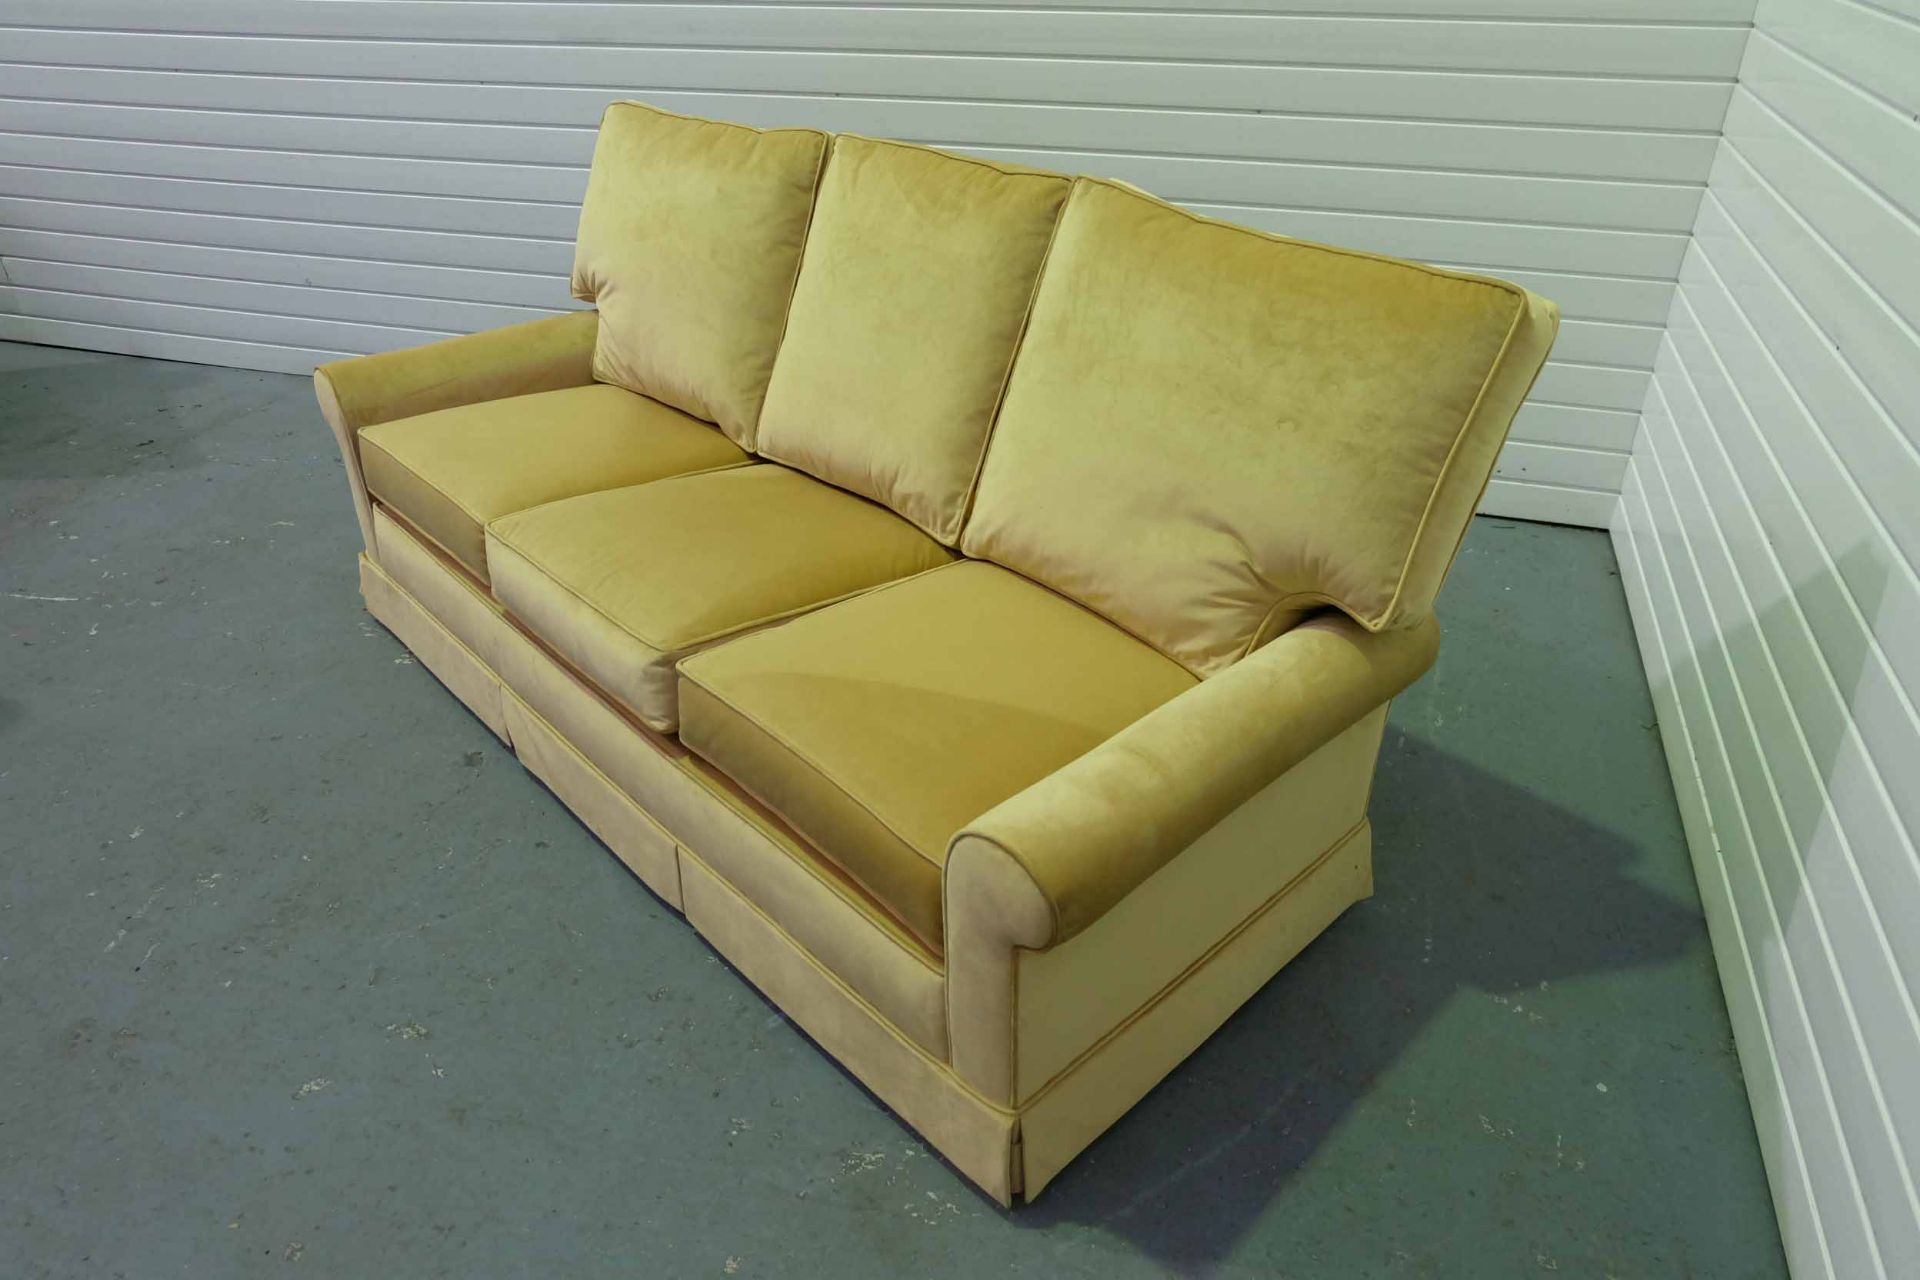 Steed Upholstery 'Hammond' Range 3 Seater Sofa. With Valance. - Image 2 of 3